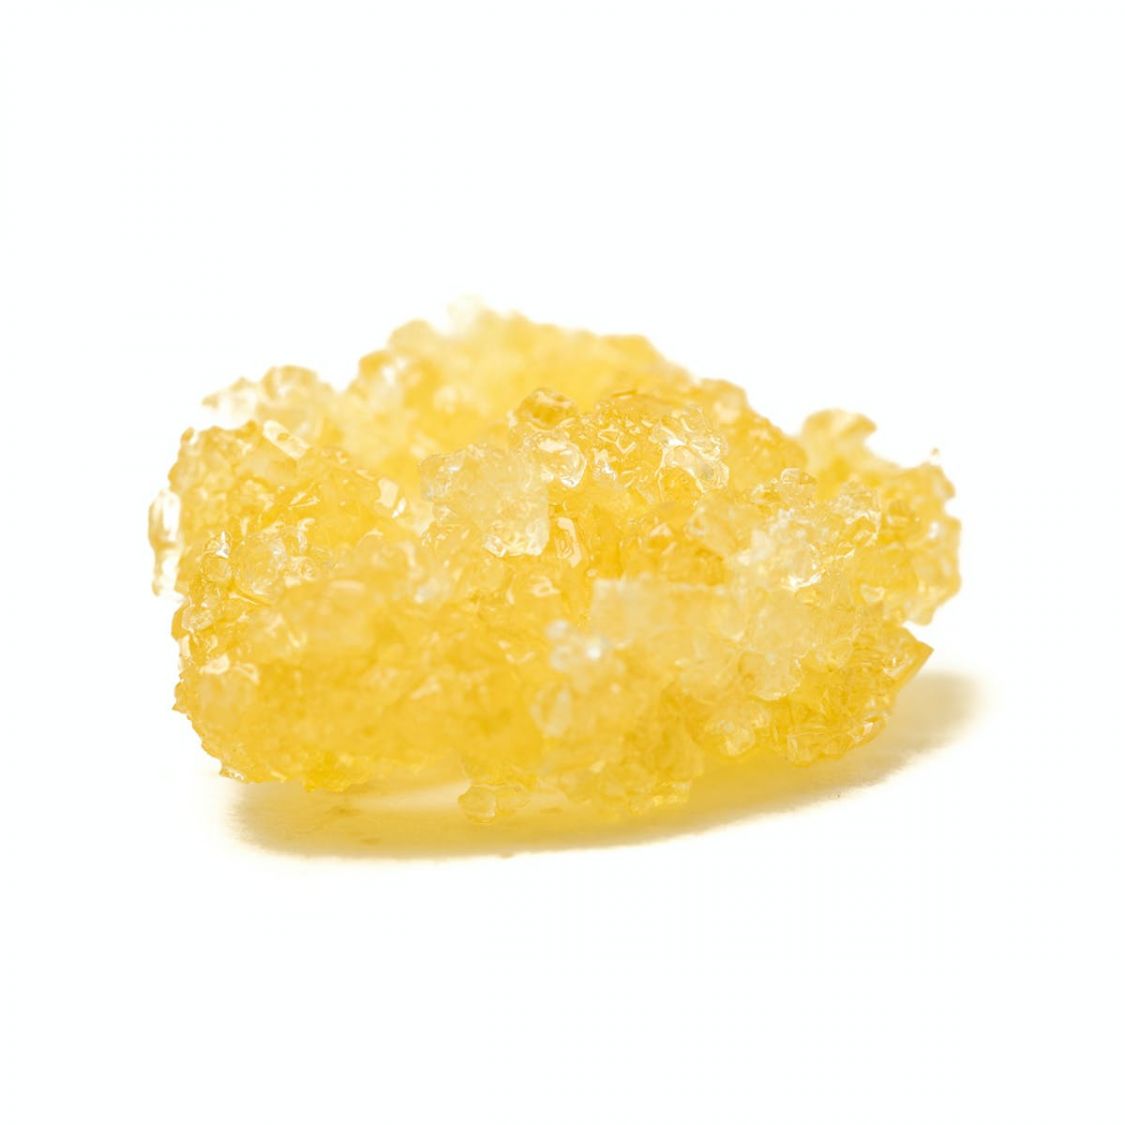 SUPREME GAS Grape LIVE RESIN Concentrates Concentrate